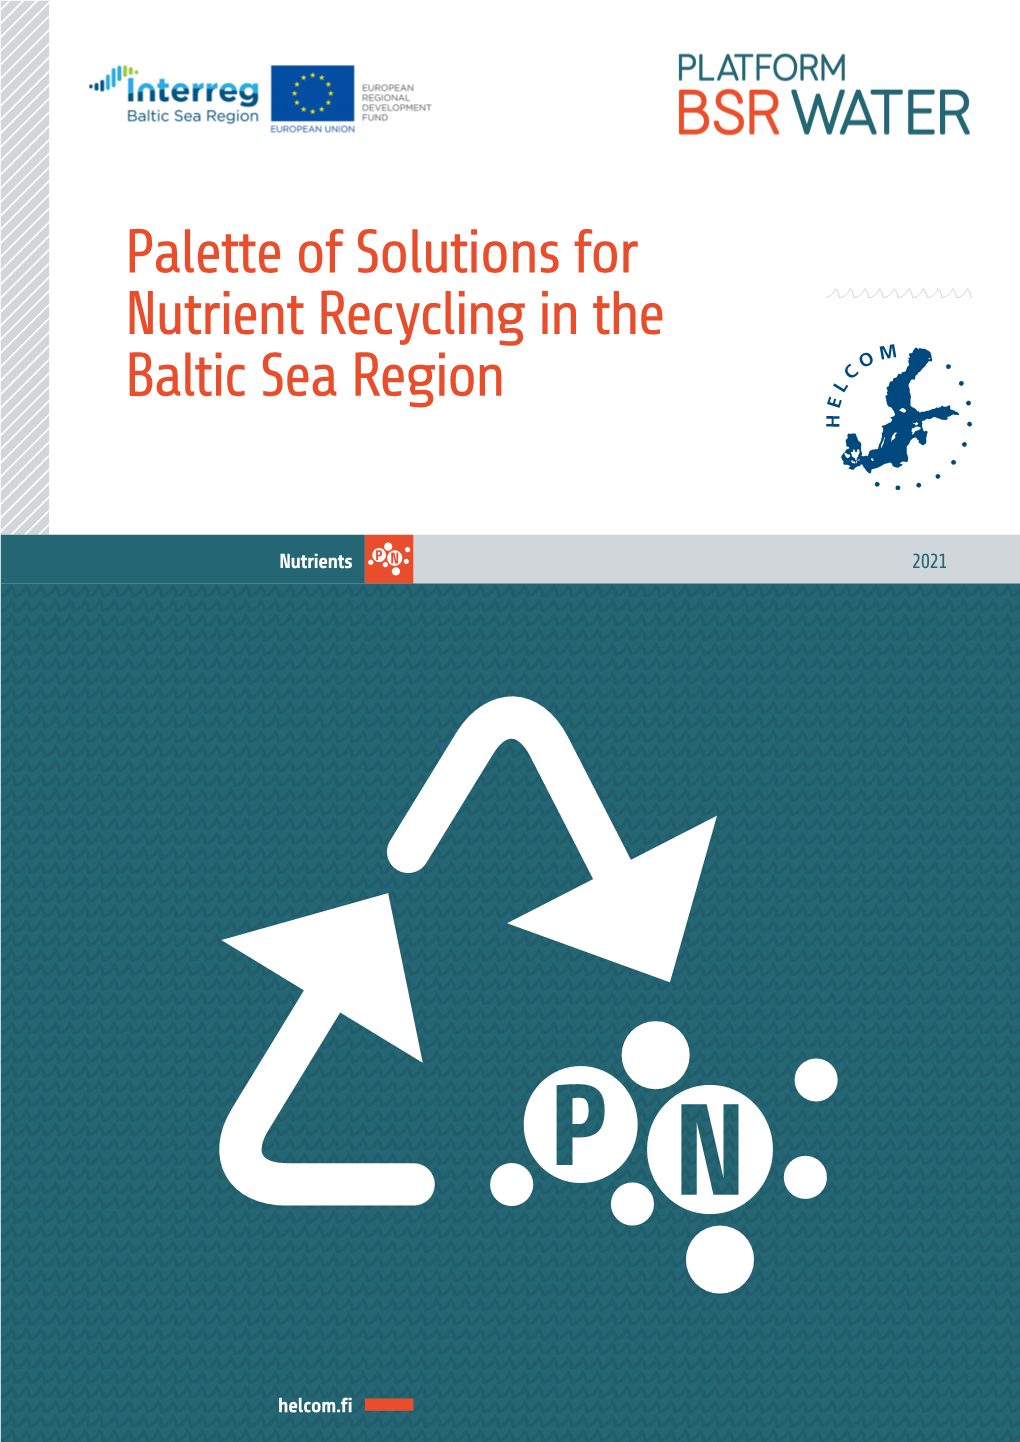 Palette of Solutions for Nutrient Recycling in the Baltic Sea Region